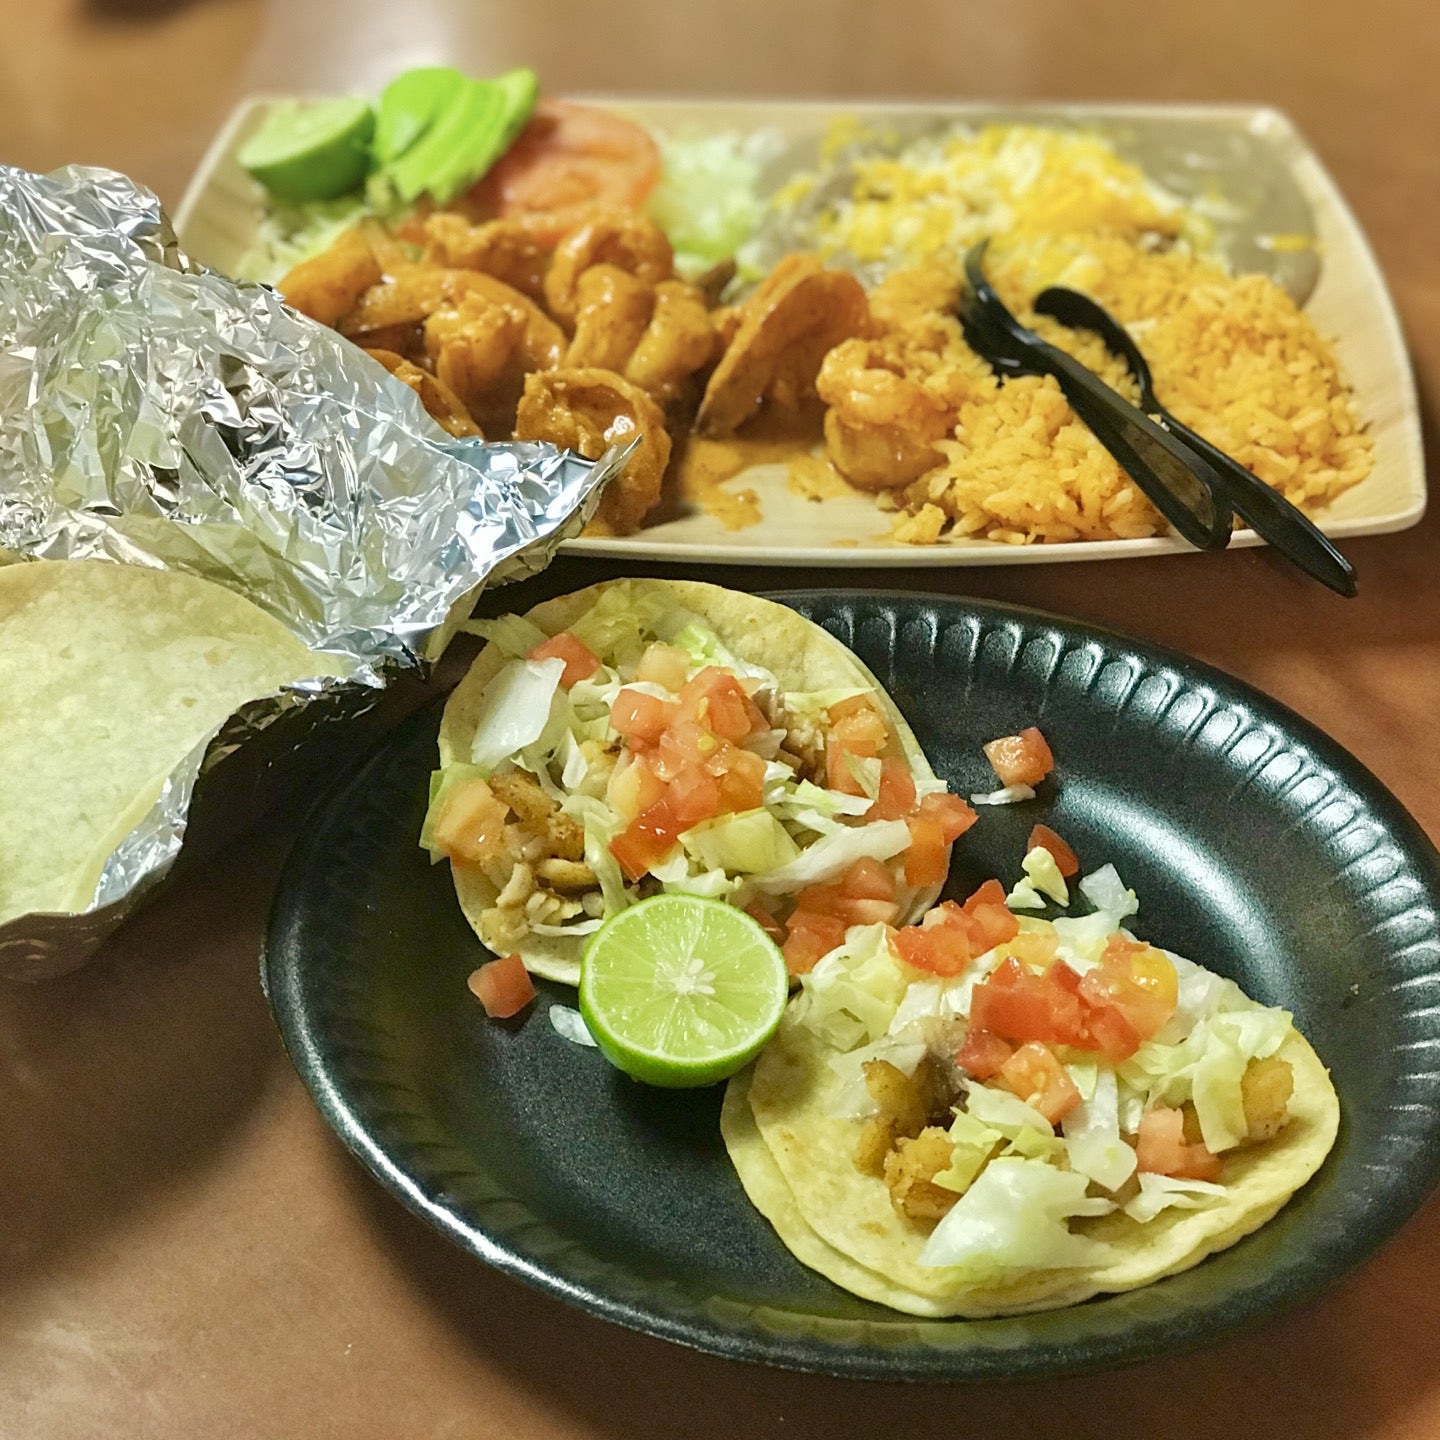 Mariscos Colima, 40208 Highway 41, Oakhurst, CA, Mexican - MapQuest